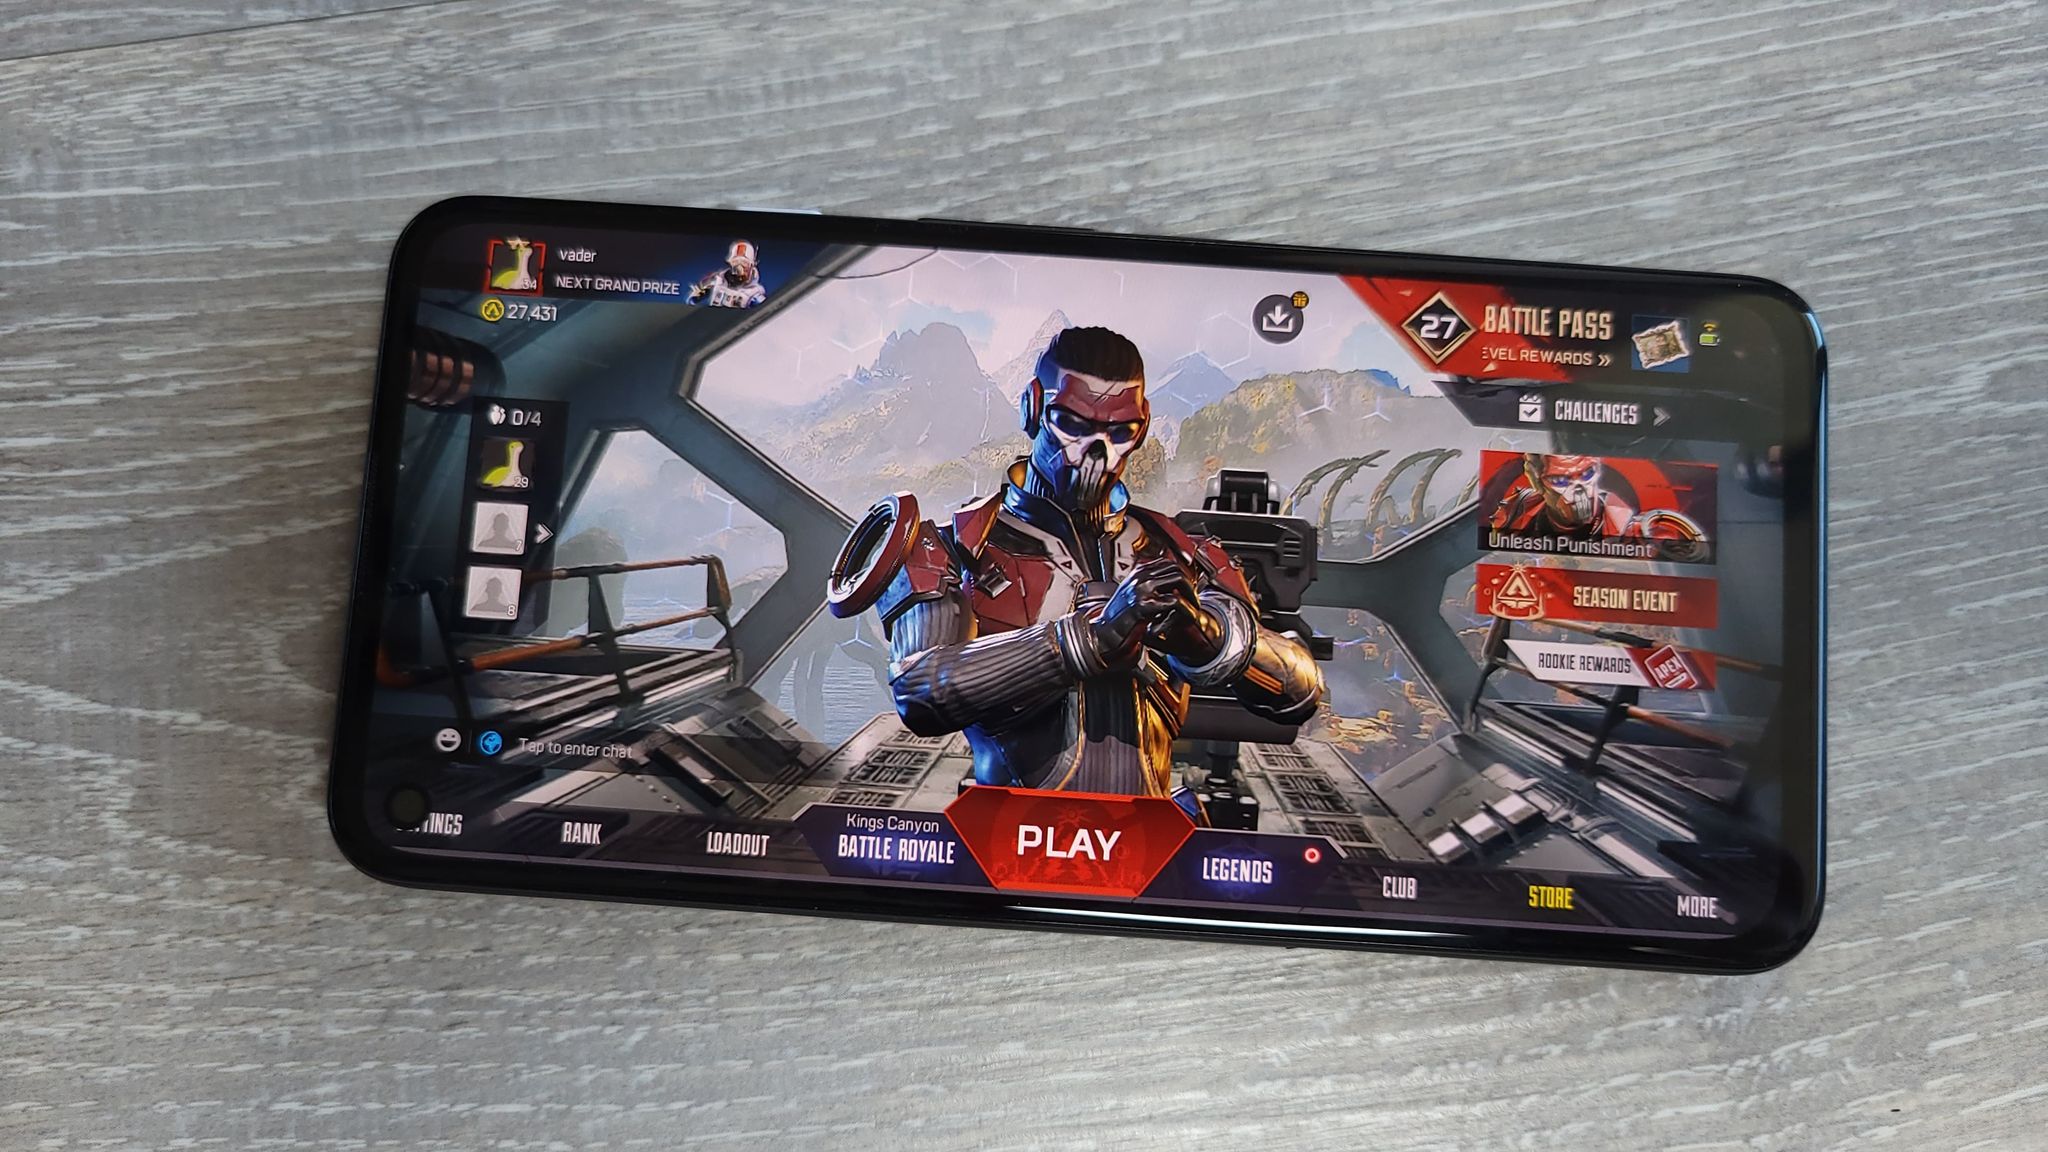 APEX LEGENDS MOBILE IS BACK!! (NEW GAMEPLAY RELEASE